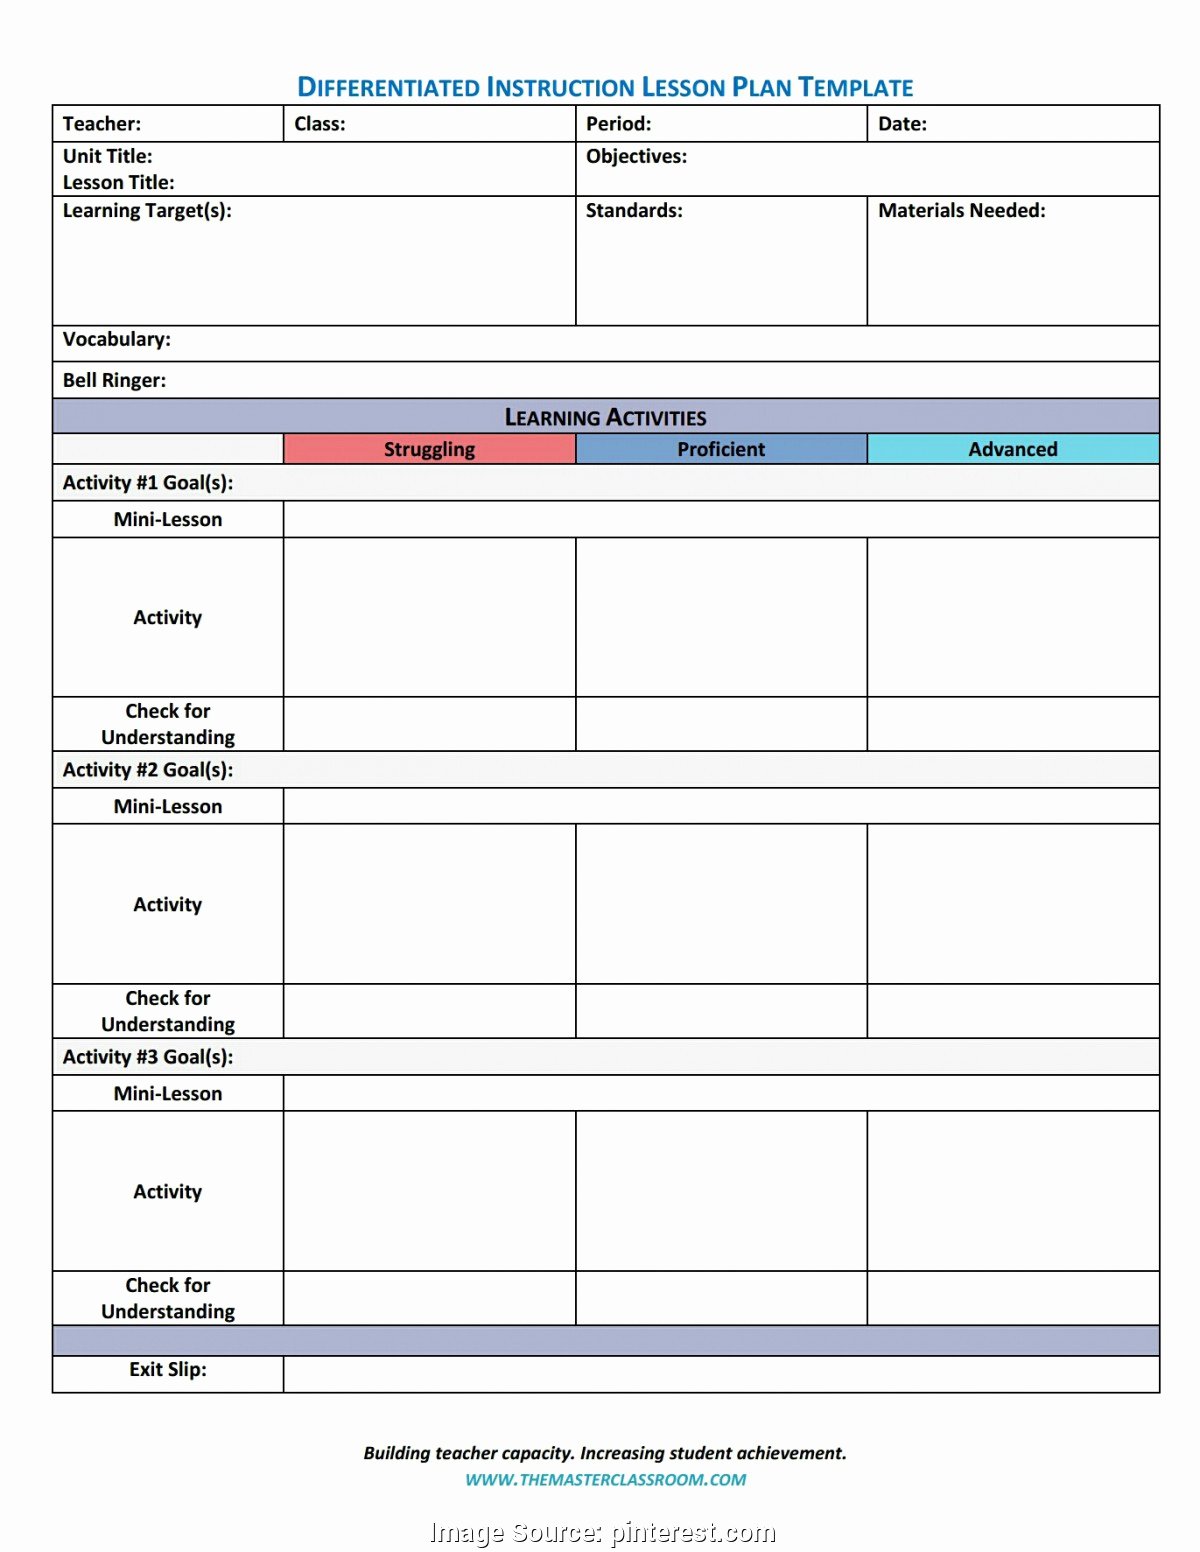 Differentiated Lesson Plan Template Awesome Fresh 5e Model Lesson Plan Template California Classroom